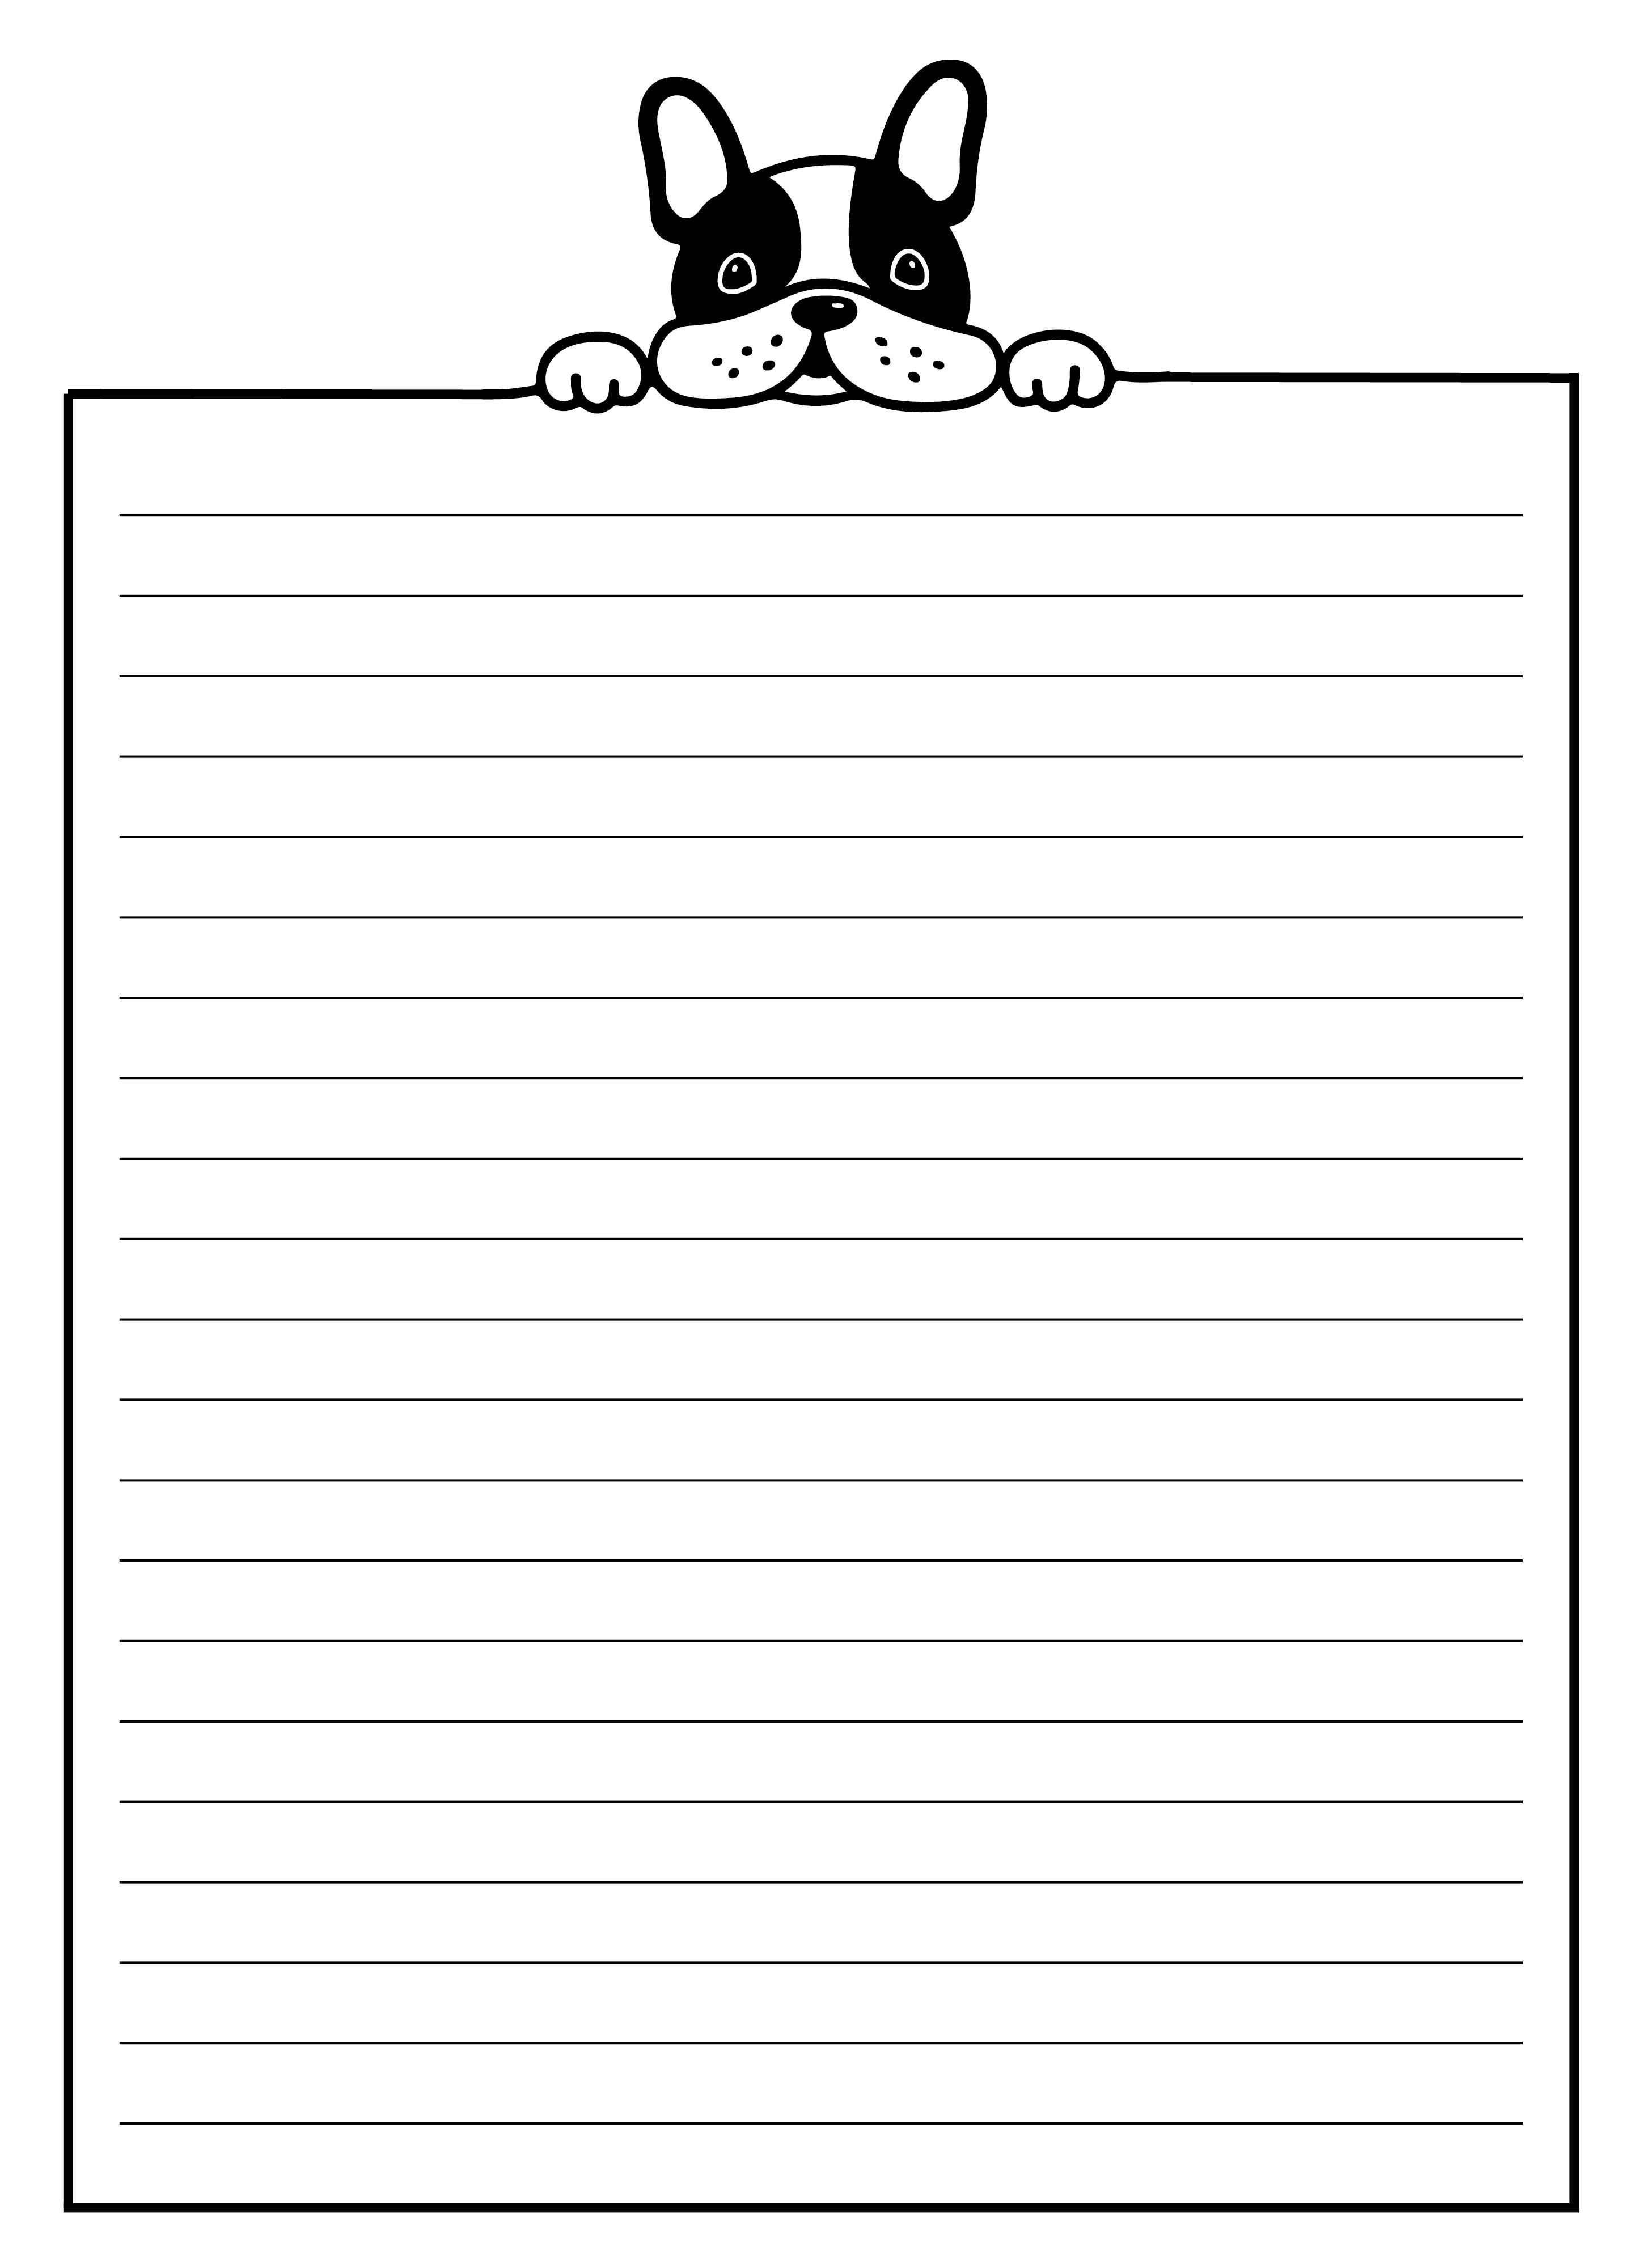 7 Best Images Of Dog Free Printable Lined Writing Paper With Borders 